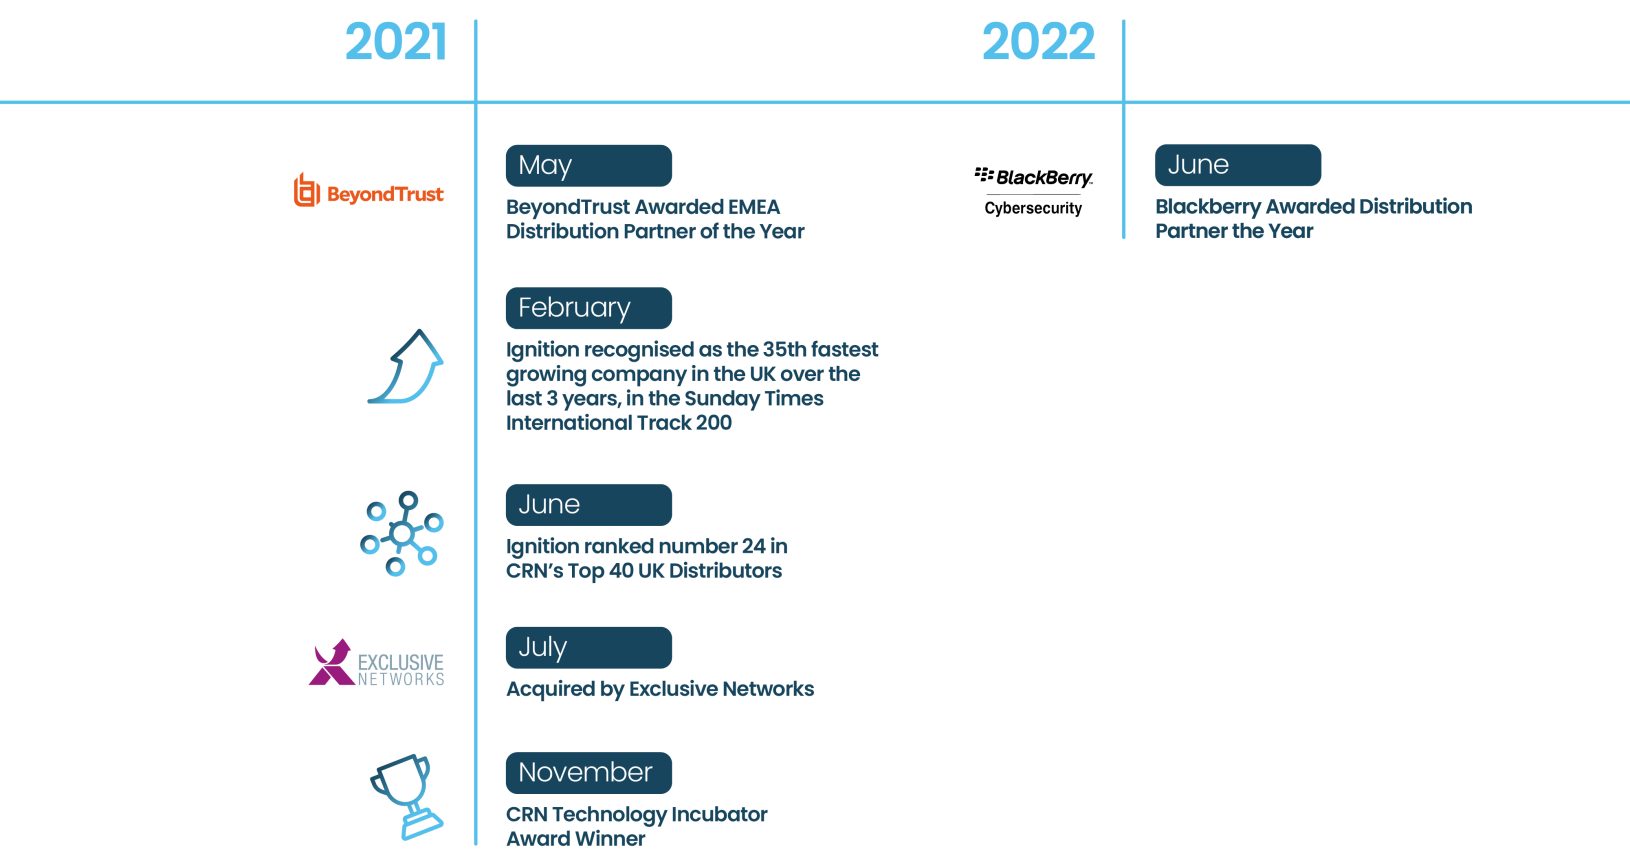 Our Story timeline, years 2021 to 2022